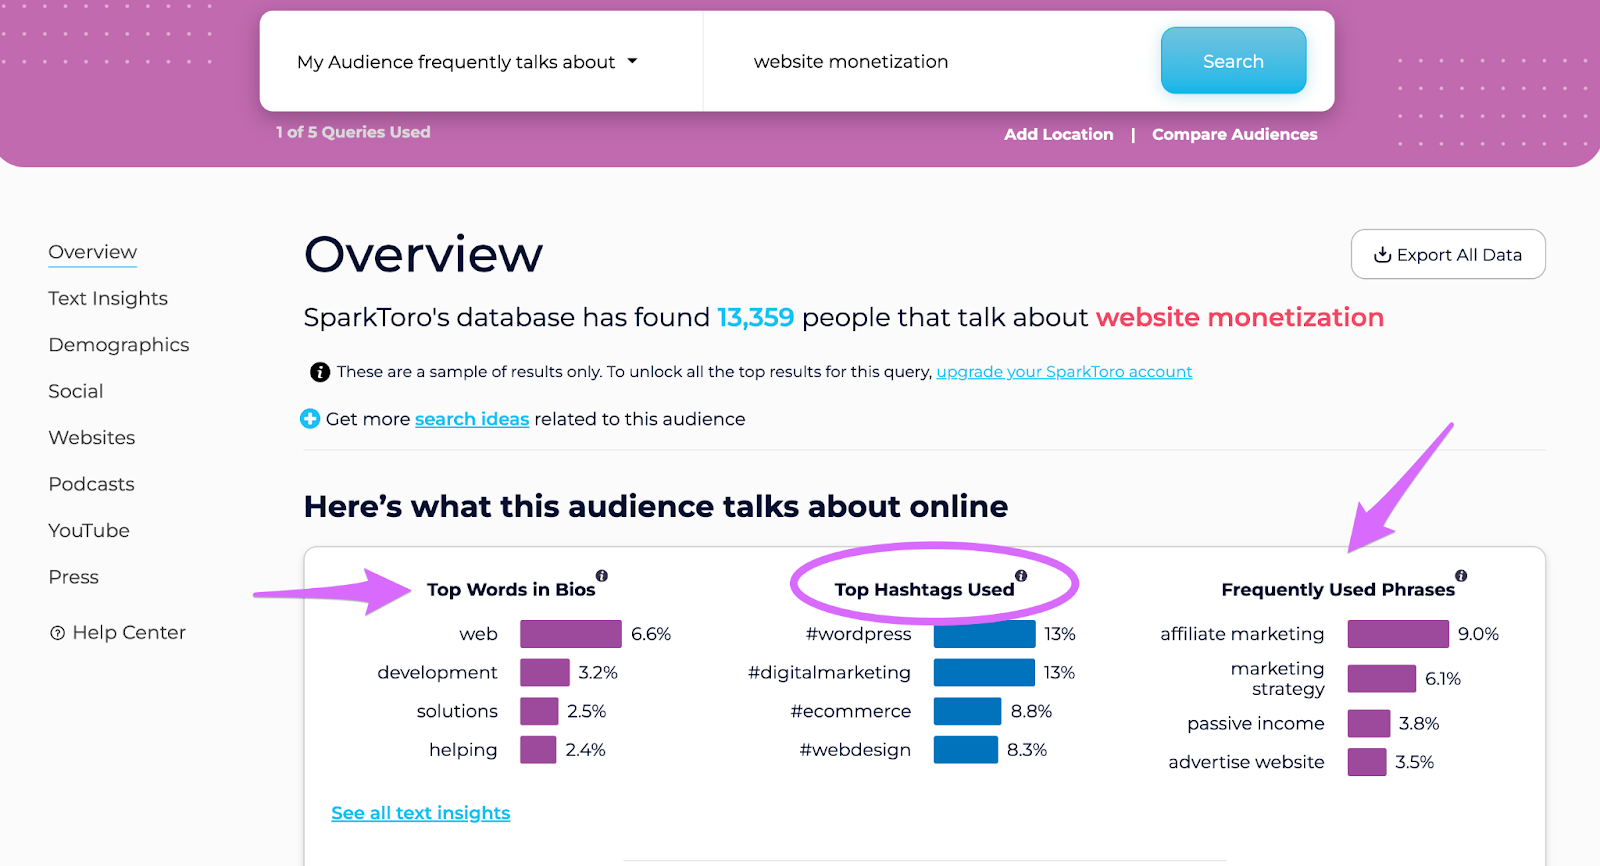 sparktoro overview page based on using filter for what your audience frequently talks about